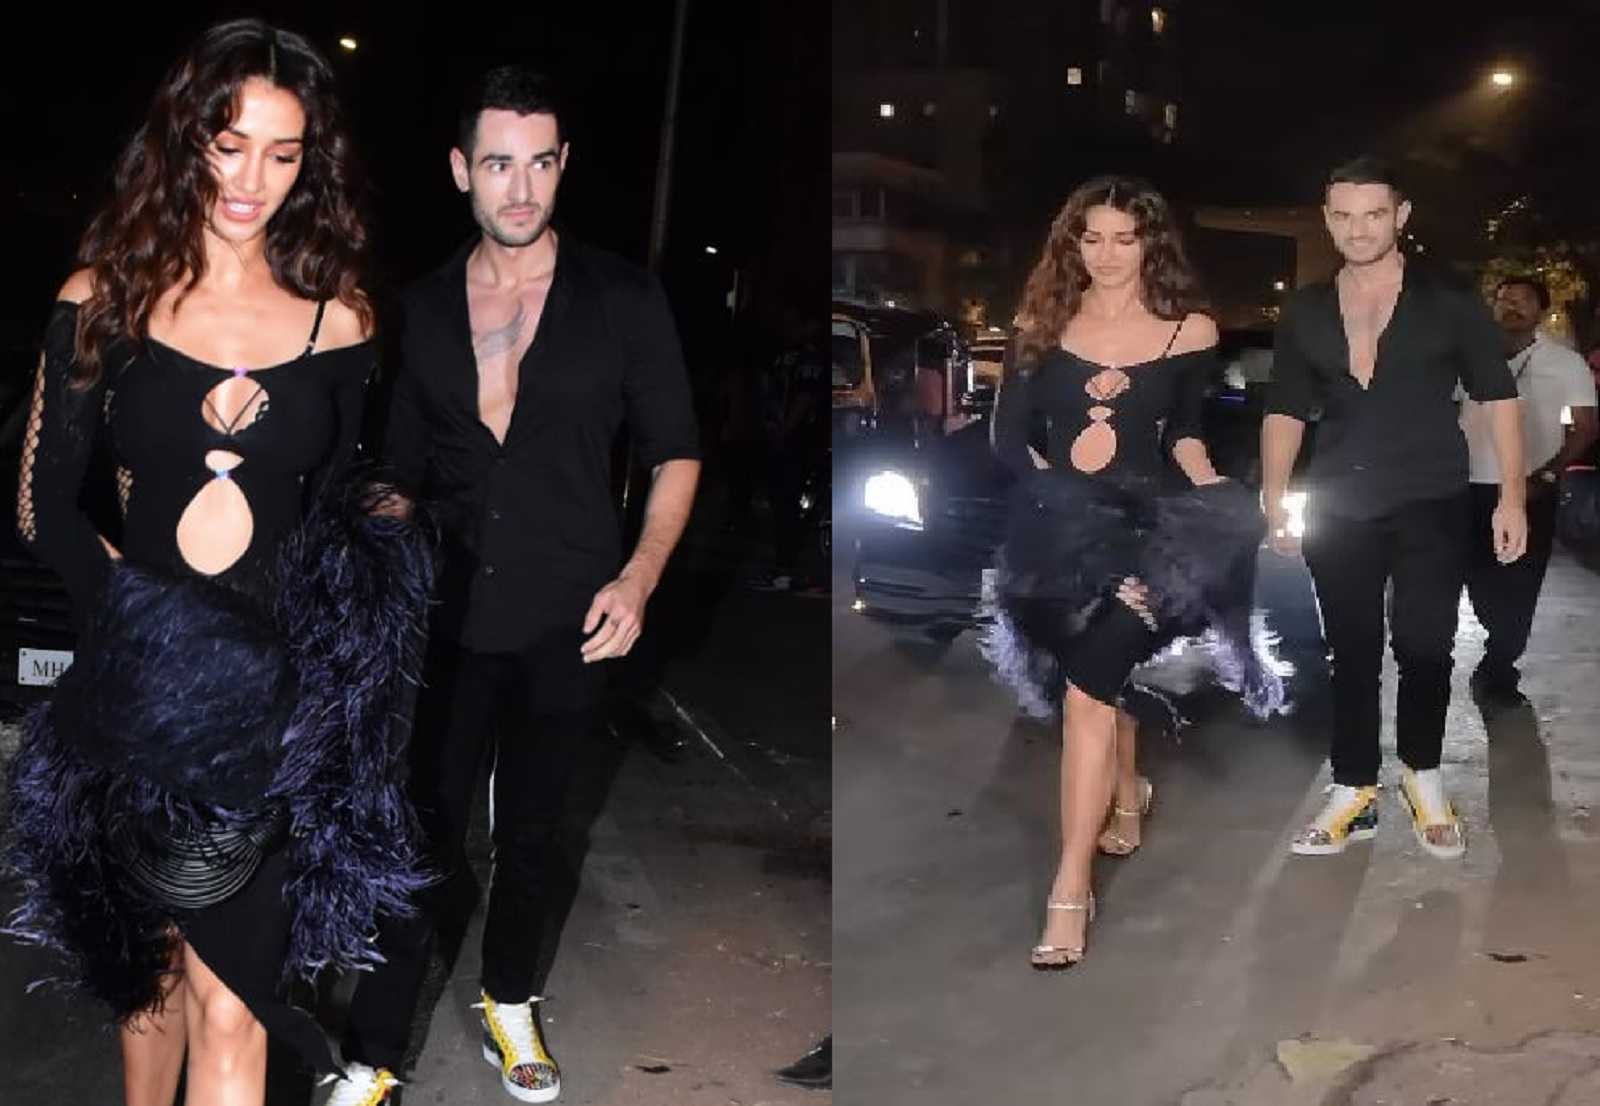 ‘Does she ever work?': Disha Patani gets trolled as she attends yet another party with rumoured BF Aleksander